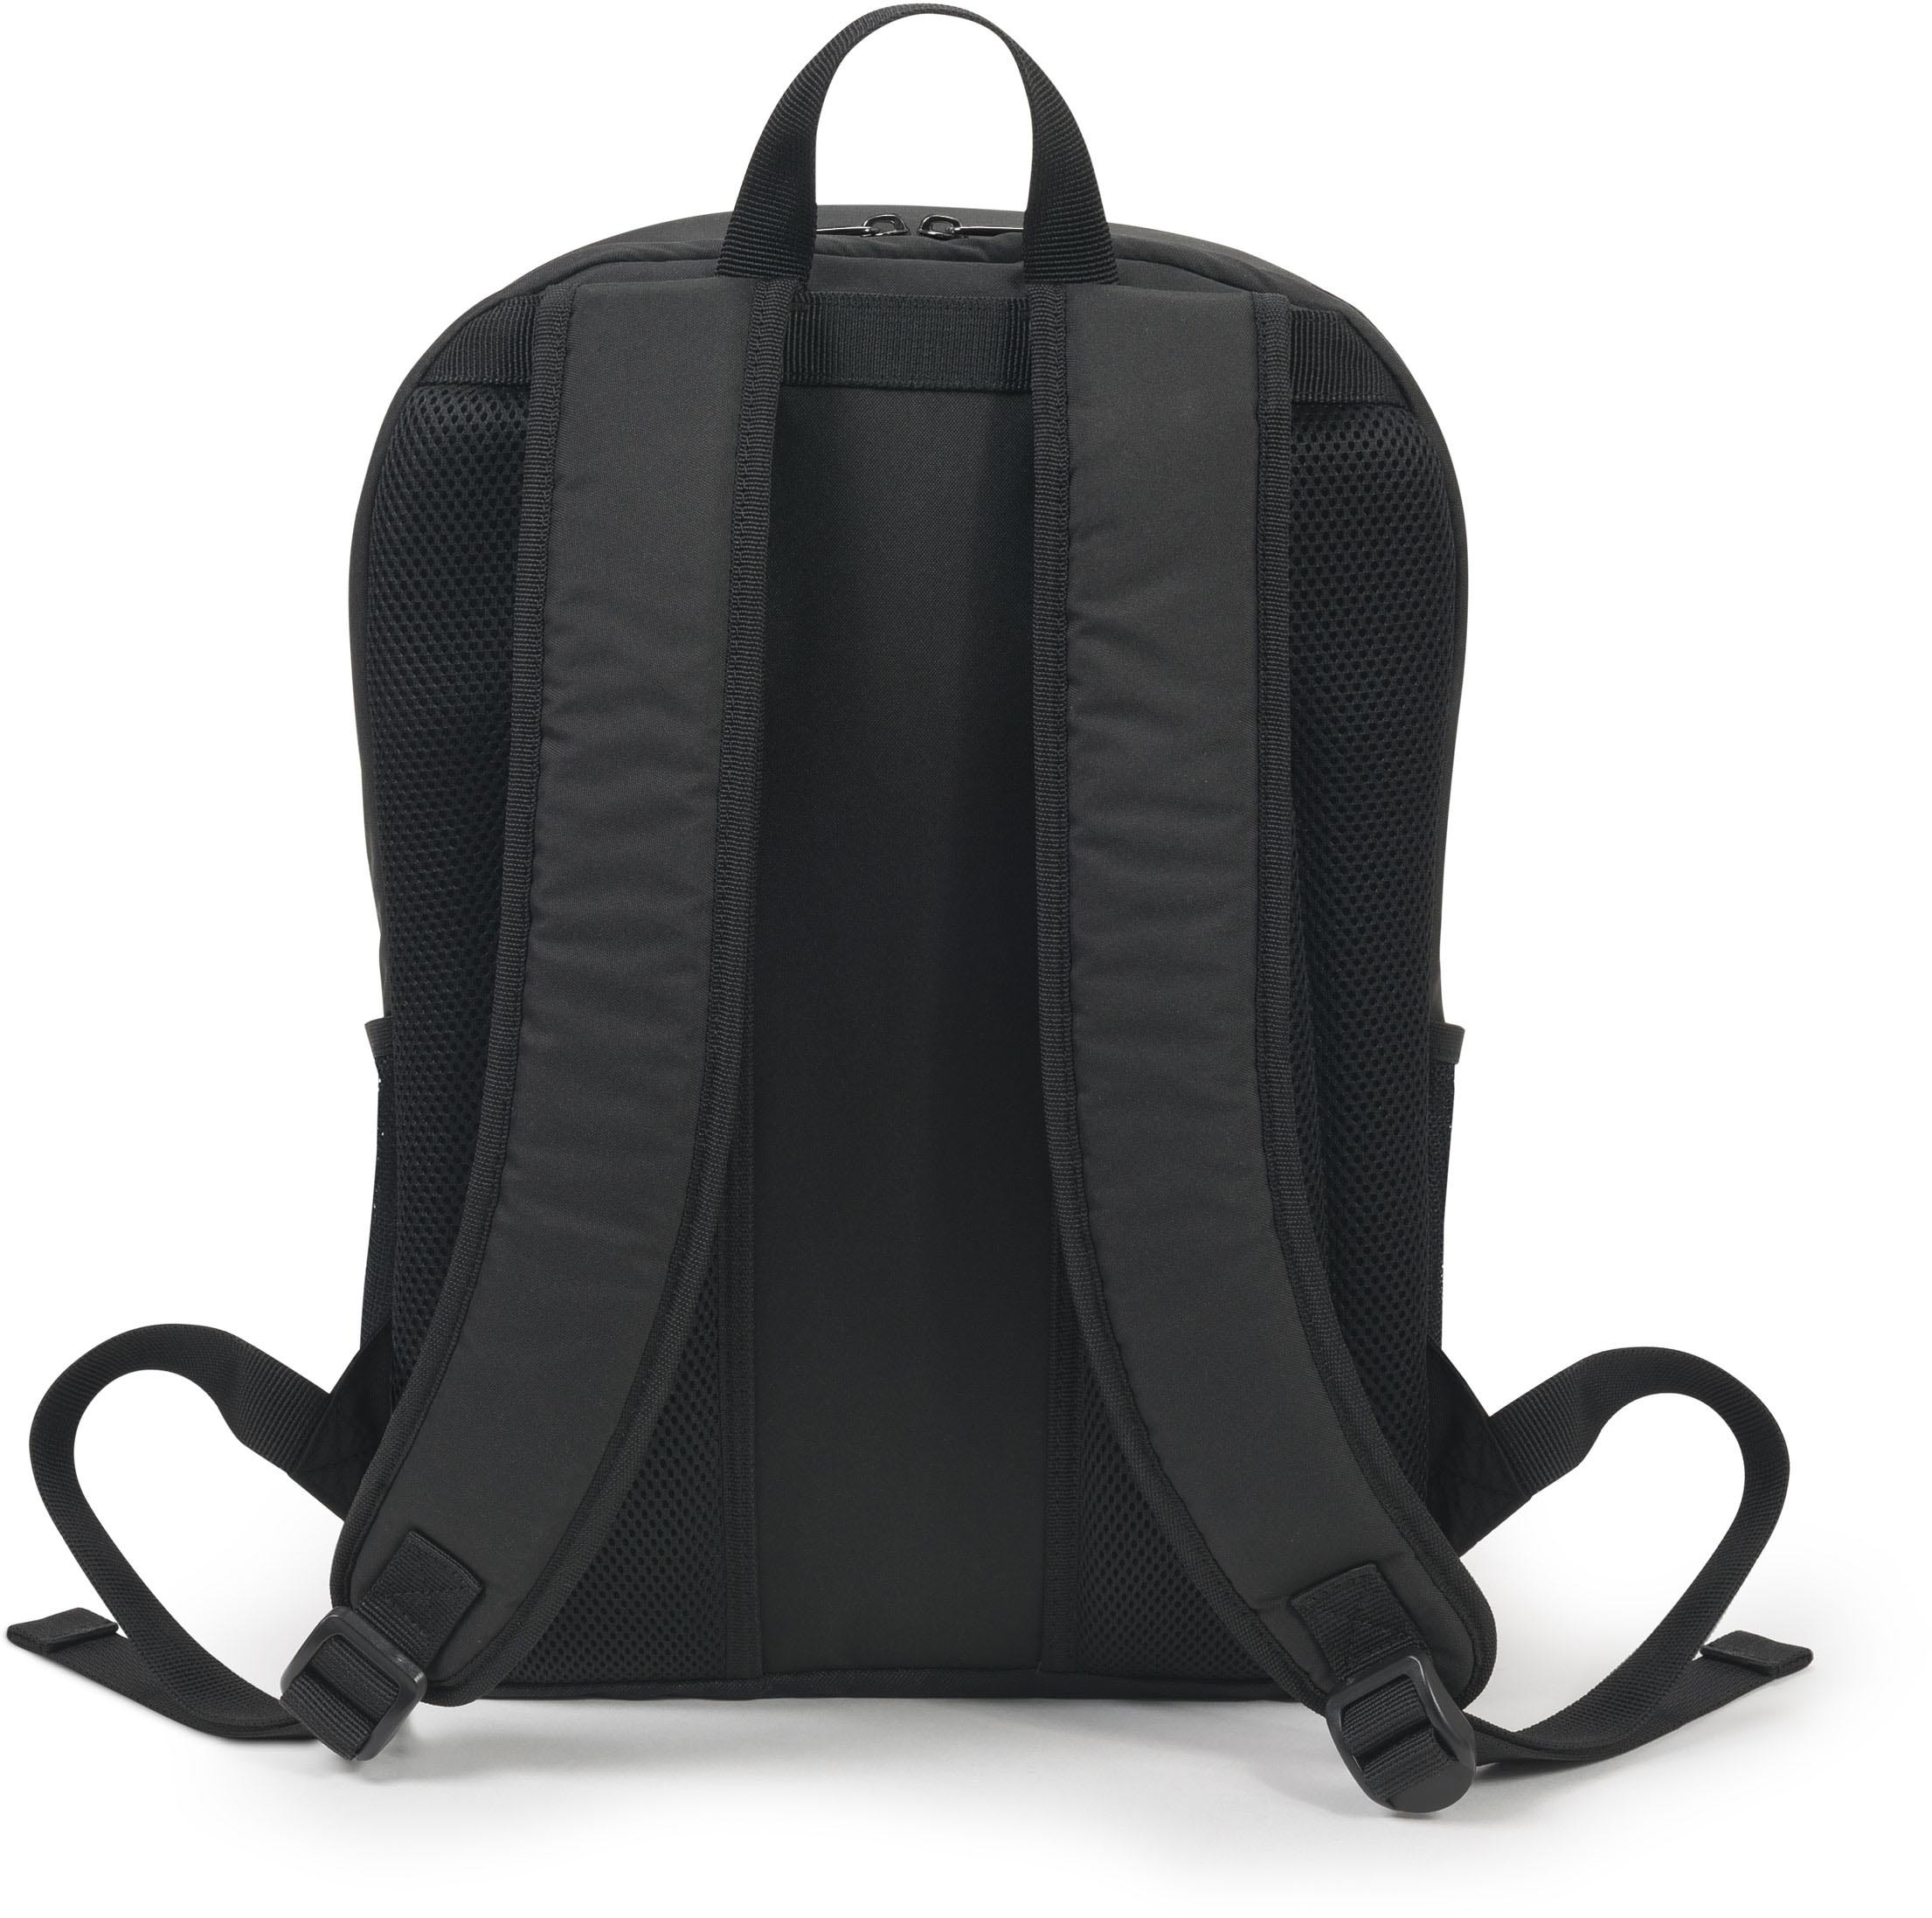 DICOTA Eco Backpack BASE black D30914-RPET for Unviversal 13-14.1